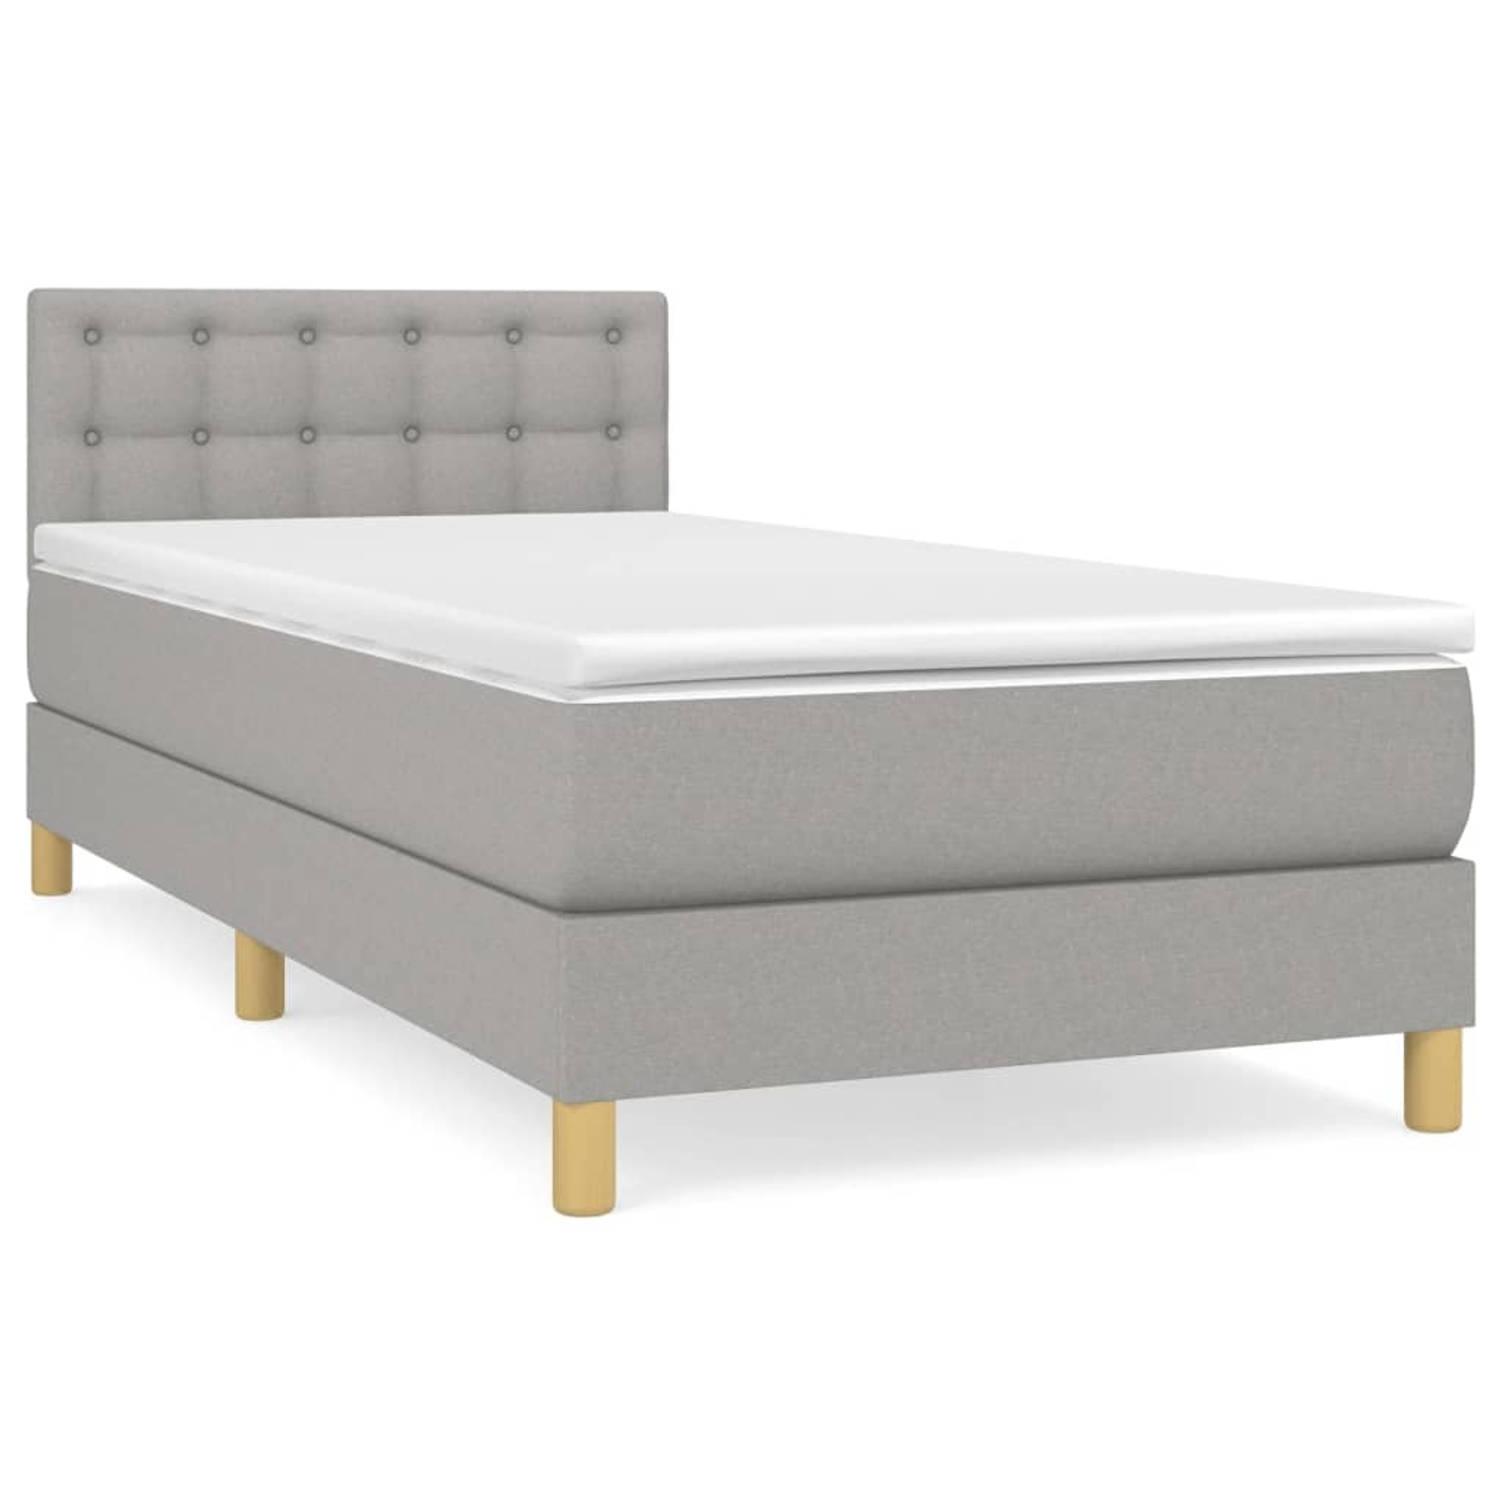 The Living Store Boxspringbed - Comfort - Bed - 203 x 80 x 78/88 cm - Lichtgrijs - Stof (100% polyester) - Pocketvering